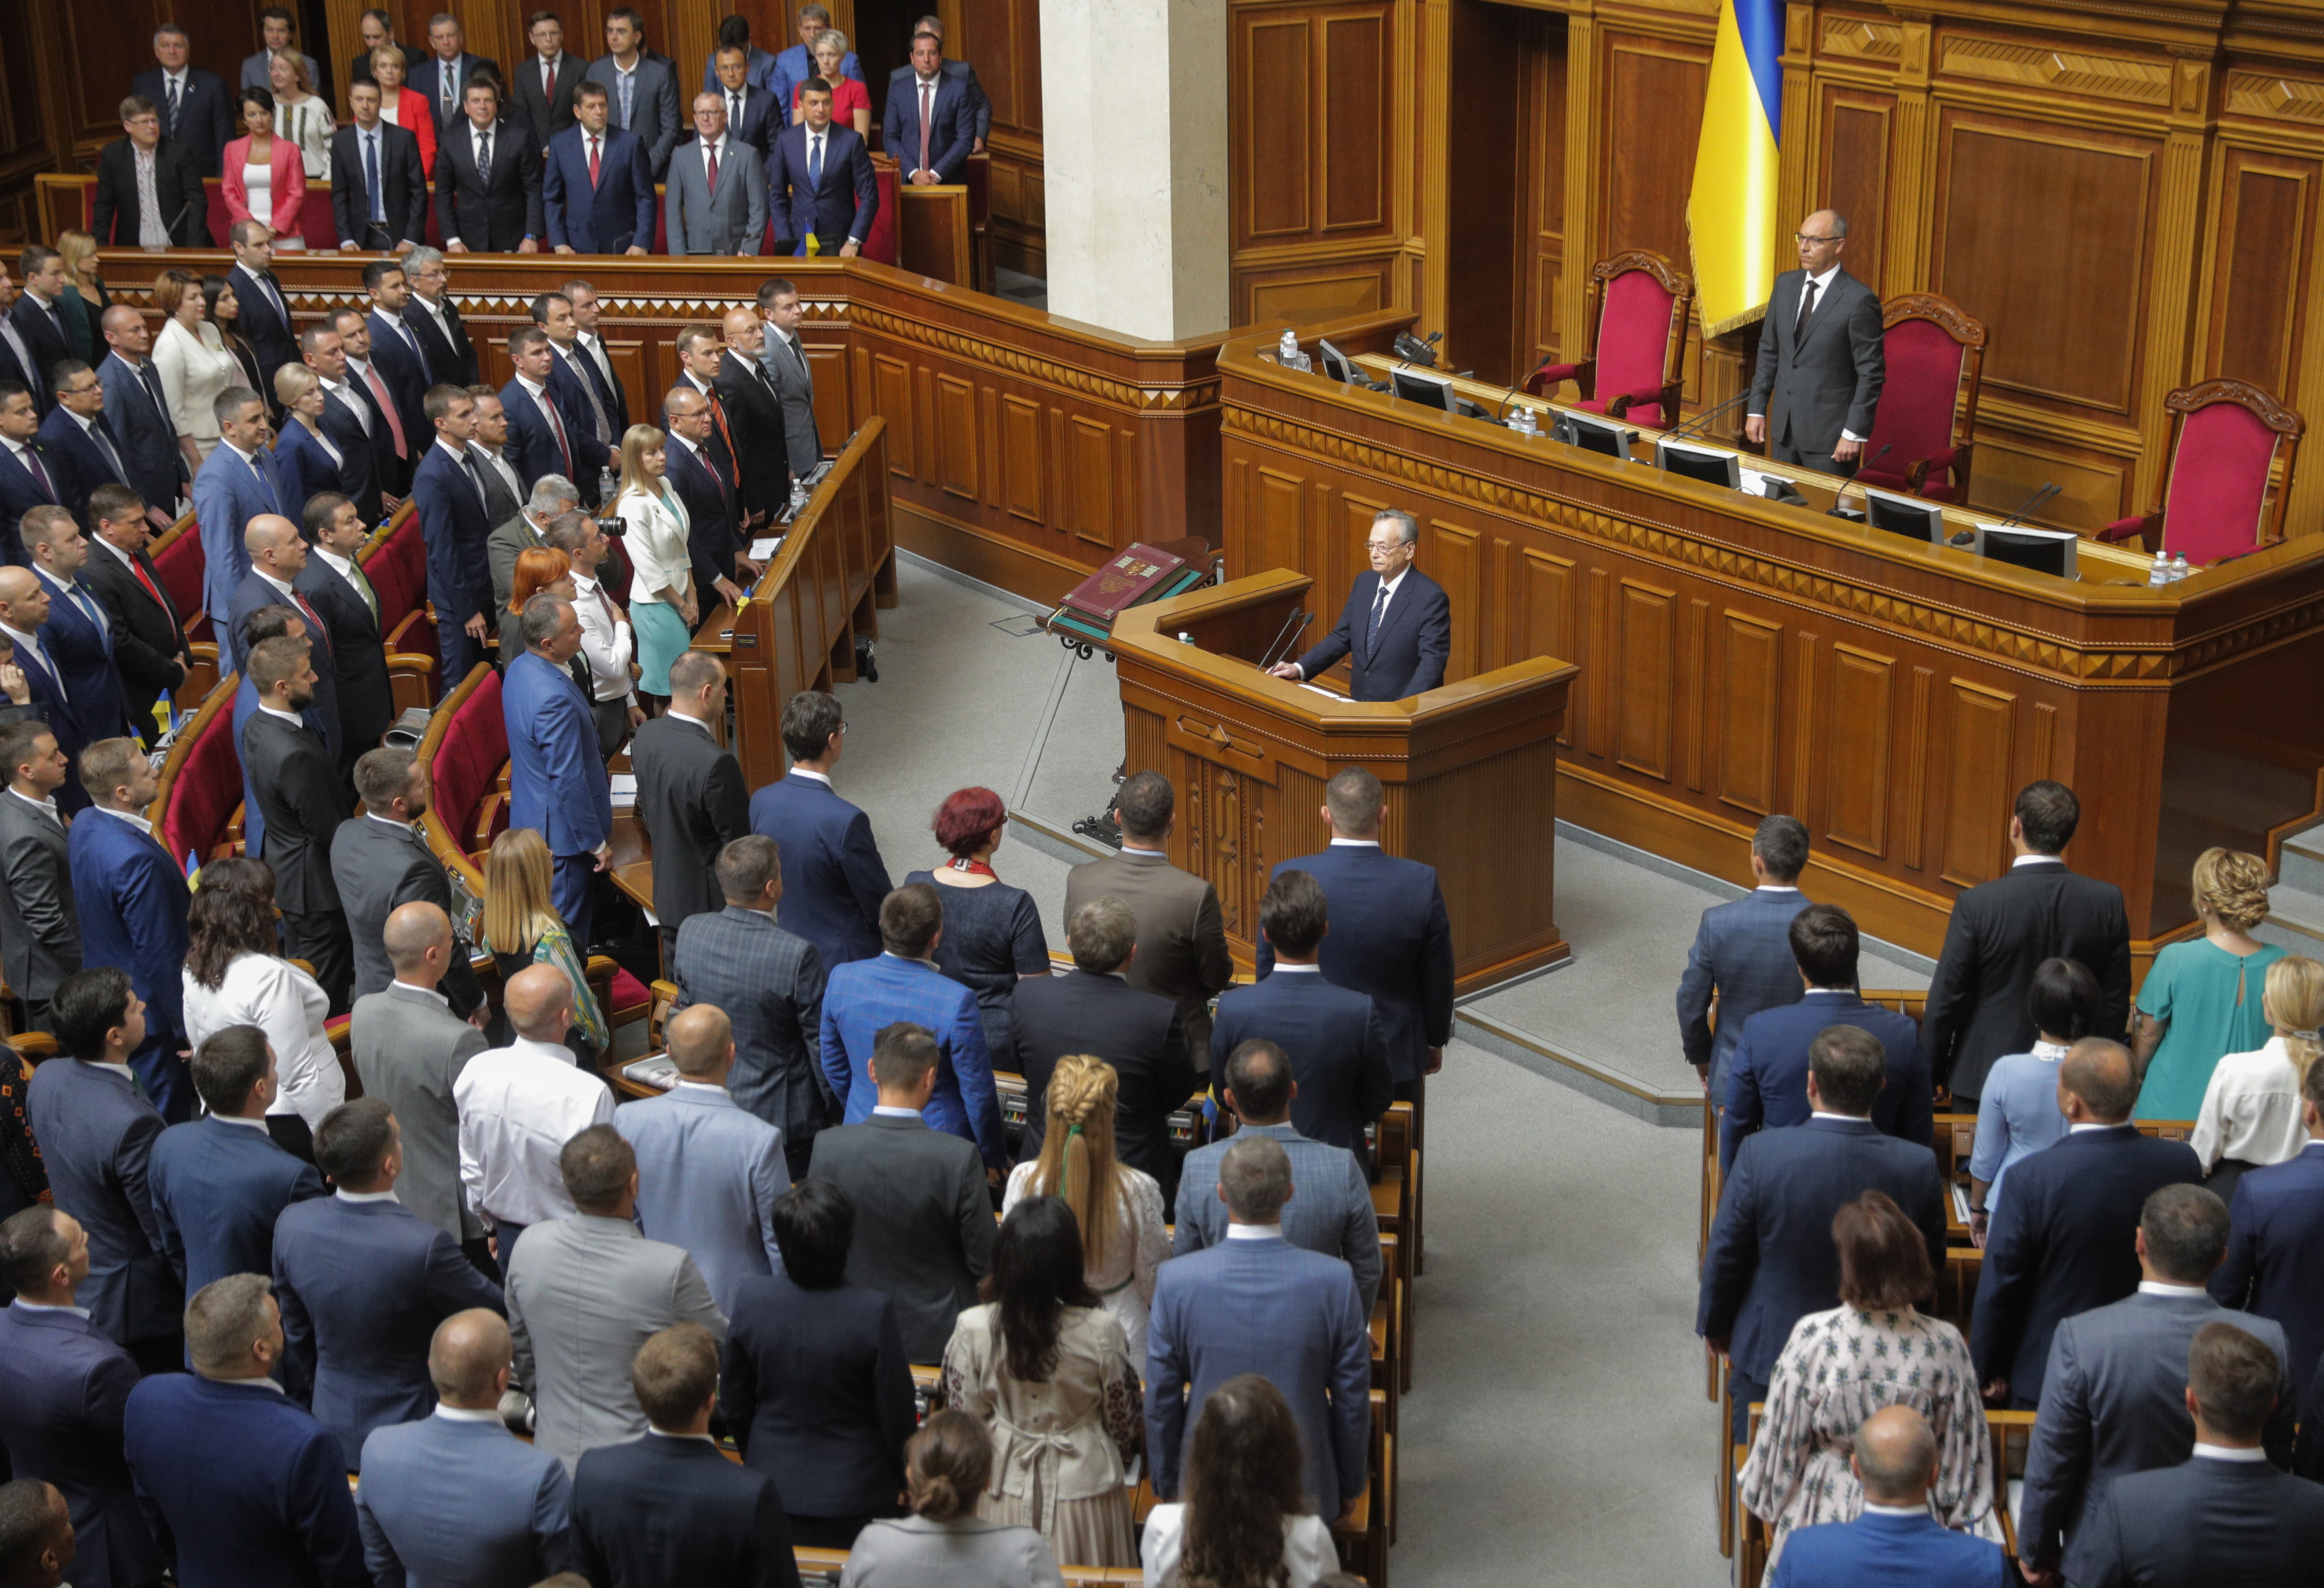 epa07800606 Newly elected deputies take the oath of office during a session of the Ukrainian Parliament in Kiev, Ukraine, 29 August 2019. It was the first parliamentary session following the general elections in the country. Ukrainians took part in the parliamentary elections on 21 July 2019 after President Volodymyr Zelensky dissolved previous parliament during his inauguration on 21 May 2019.  EPA/SERGEY DOLZHENKO